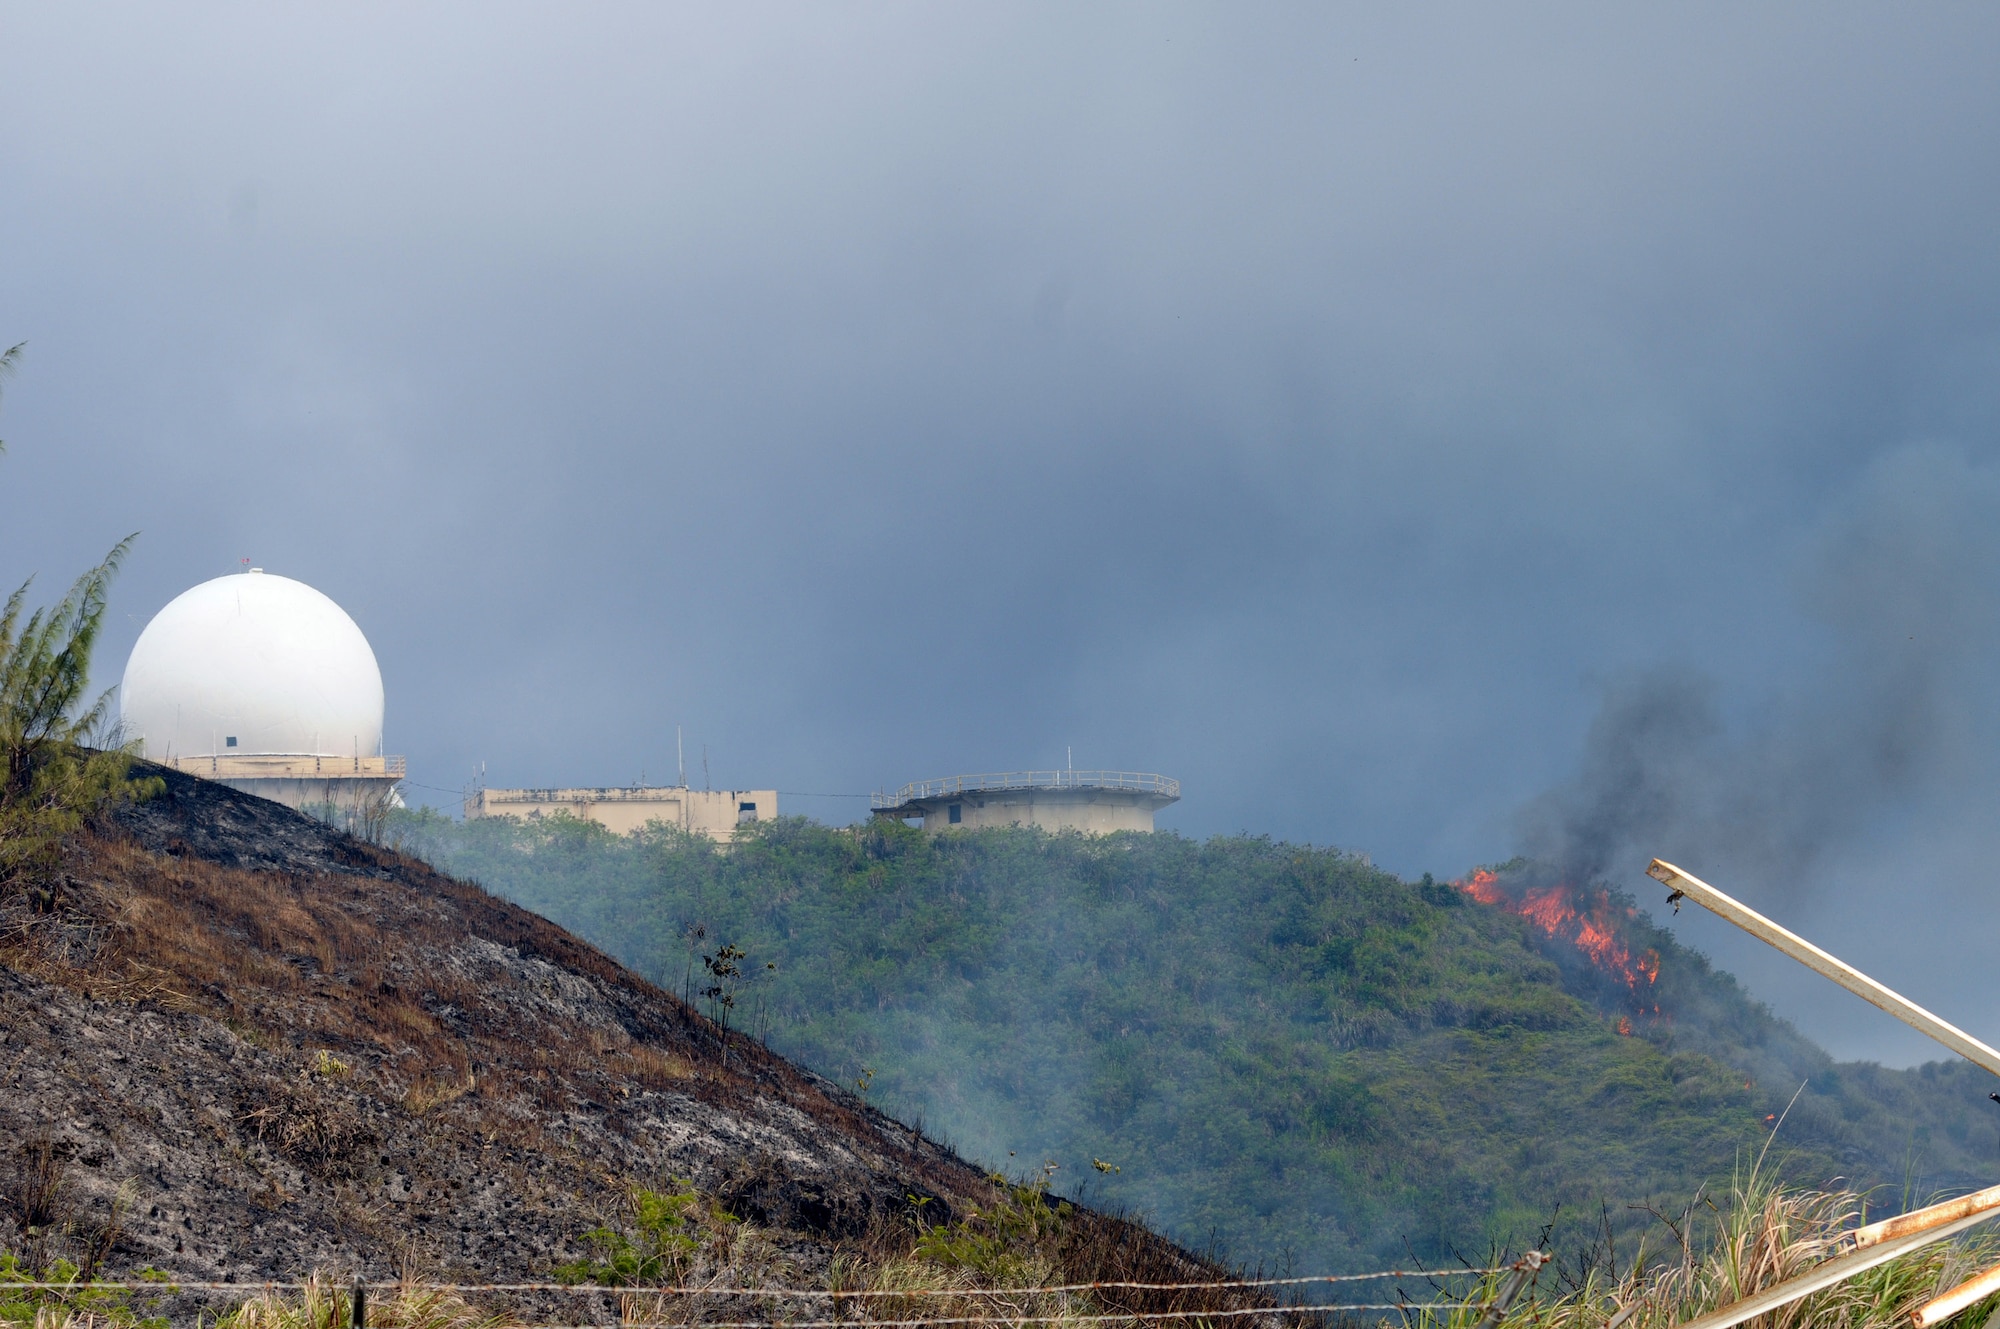 ANDERSEN AIR FORCE BASE, Guam - Fire climbs a ridge threatening a Federal Aviation Administration facility June 17.  Firefighters worked from 1 to 6 p.m. to contain and extinguish a wild fire that burned approximately 50 acres on Mt. Santa Rosa.  The fire threatened two Department of Defense sites valued at $30 million, a commercial site valued at $1.4 million and 27 houses.  A combined effort by the Guam Fire Department, Andersen AFB Fire Department, Navy Helicopter Sea Combat Squadron 25 aerial support, Navy Fire Department, 36th Civil Engineer Squadron, 554th RED HORSE Squadron totaling 68 people and 13 support vehicles contained the fire. (U.S. Air Force photo by Tech. Sgt. Michael Boquette)